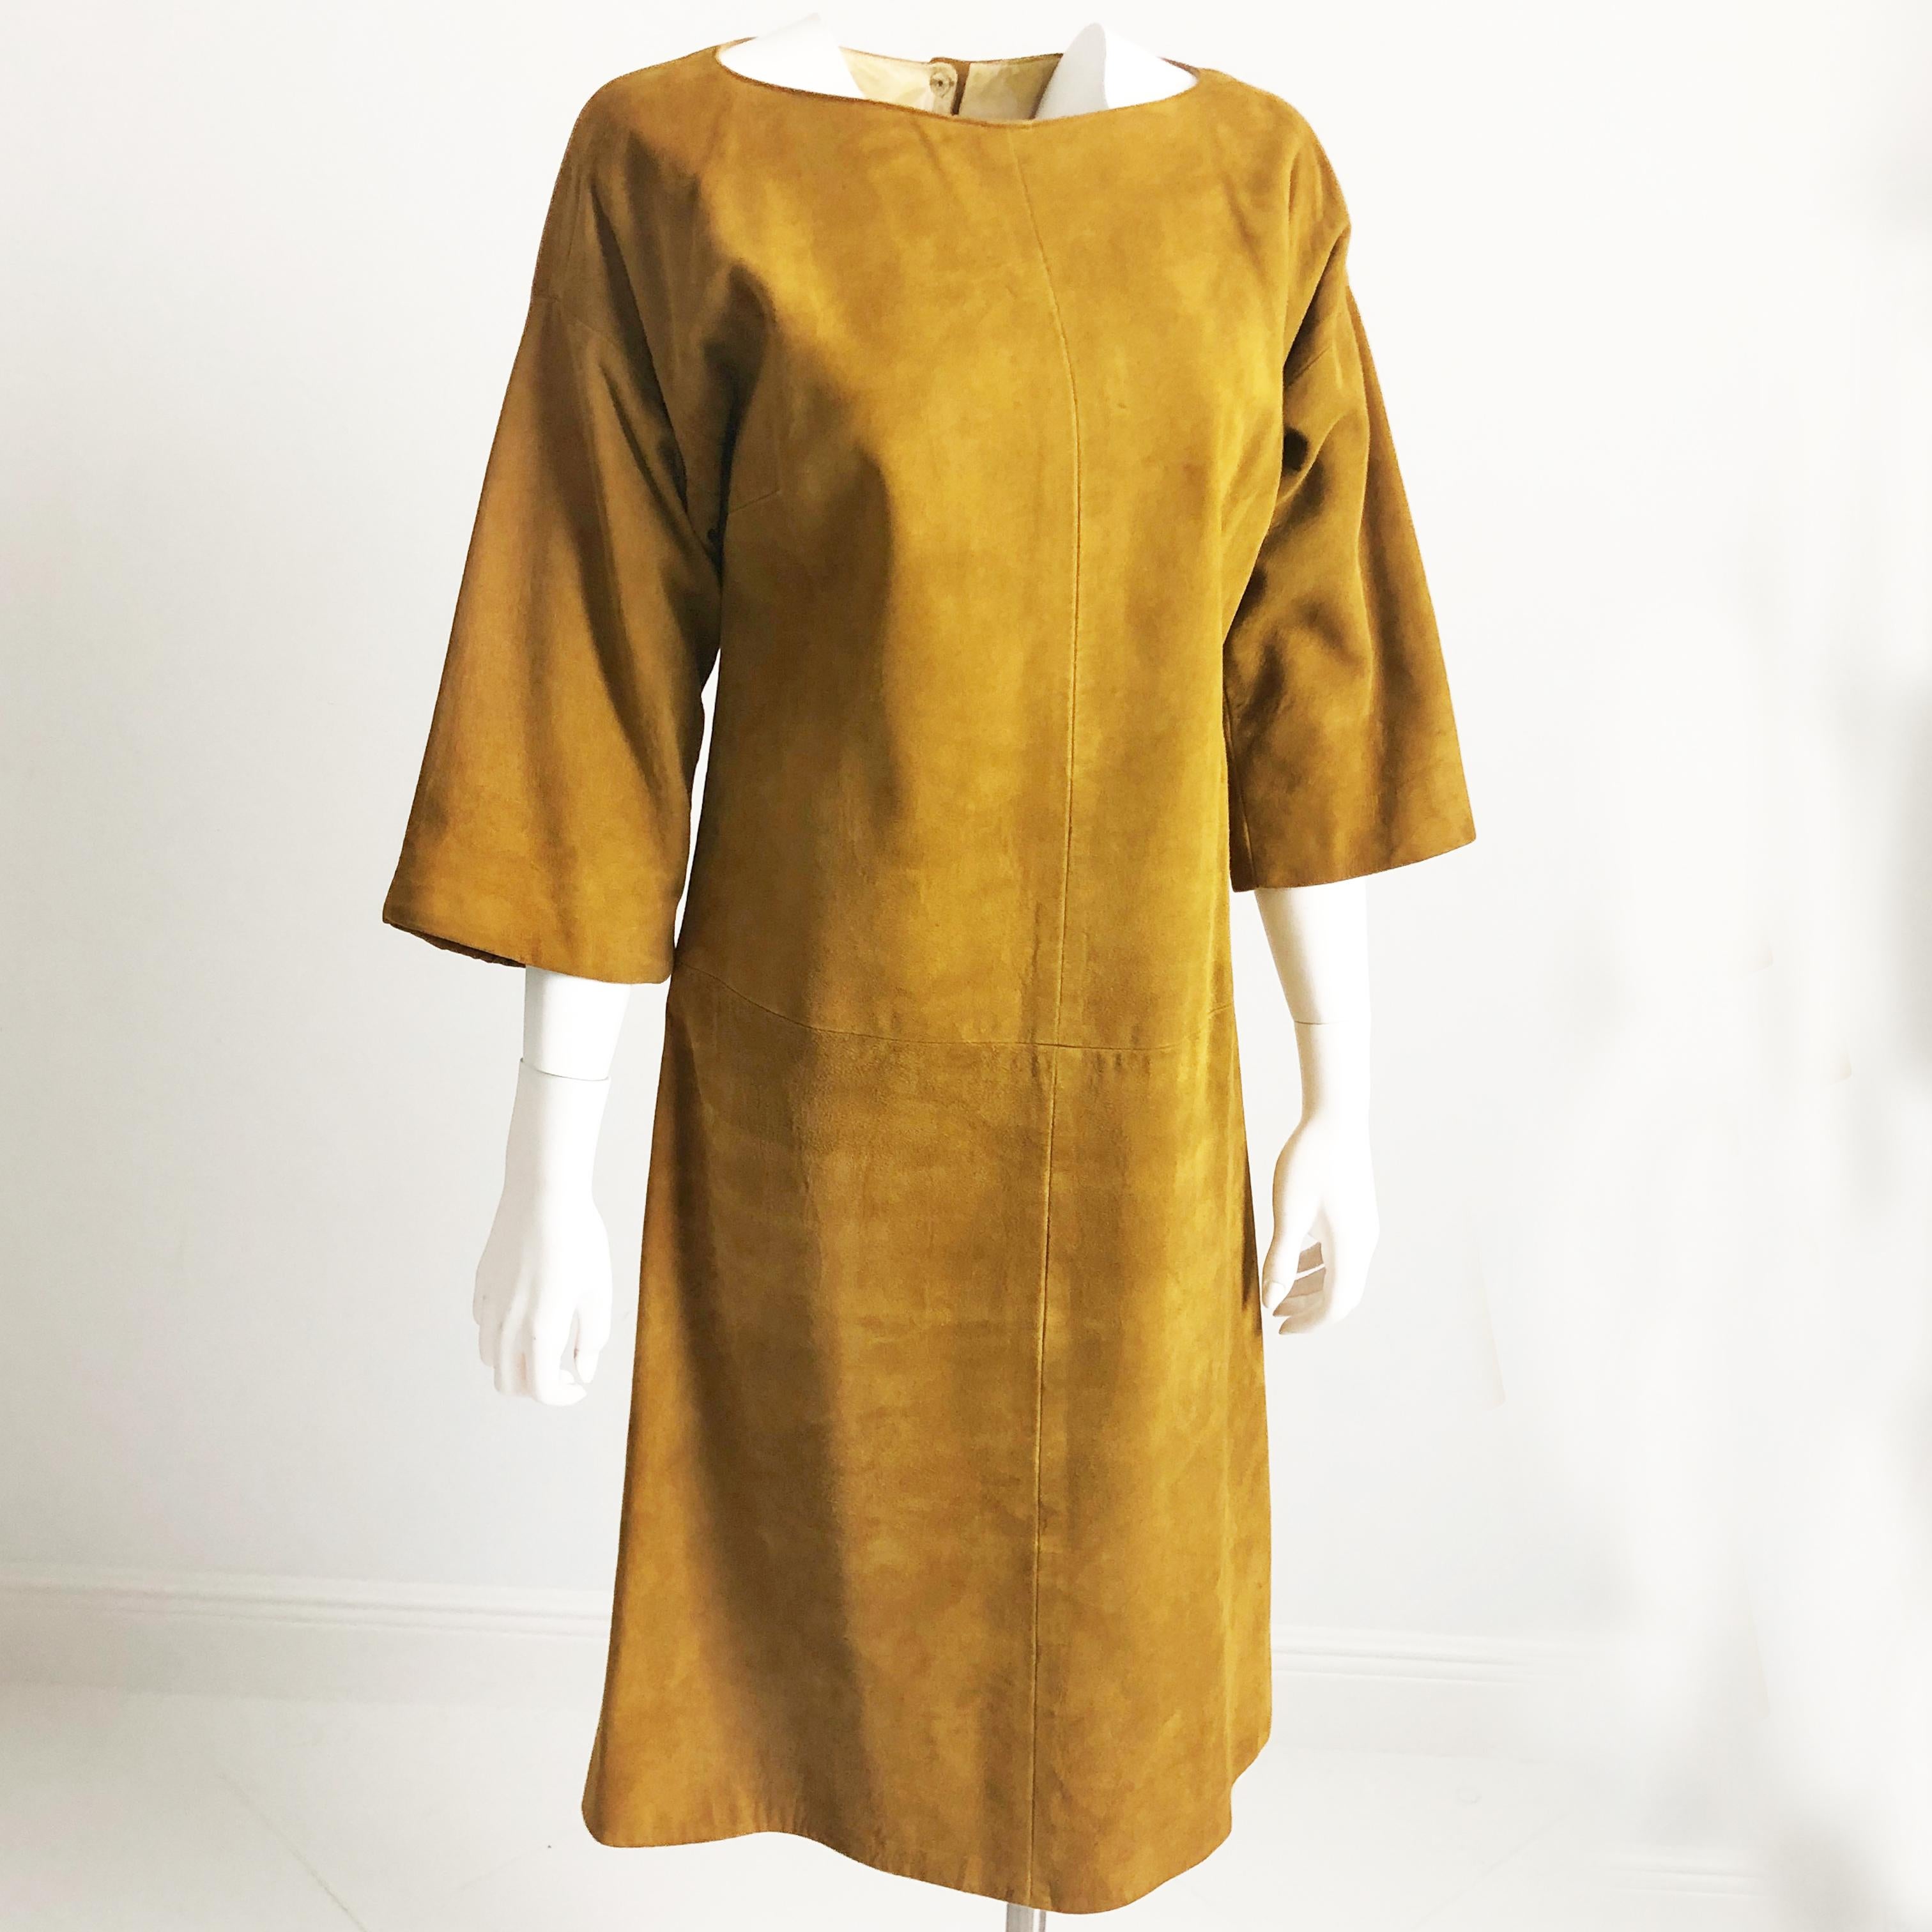 Women's or Men's Bonnie Cashin for Sills Dress Gold Suede Leather Kimono Style Sleeves Rare 1960s For Sale